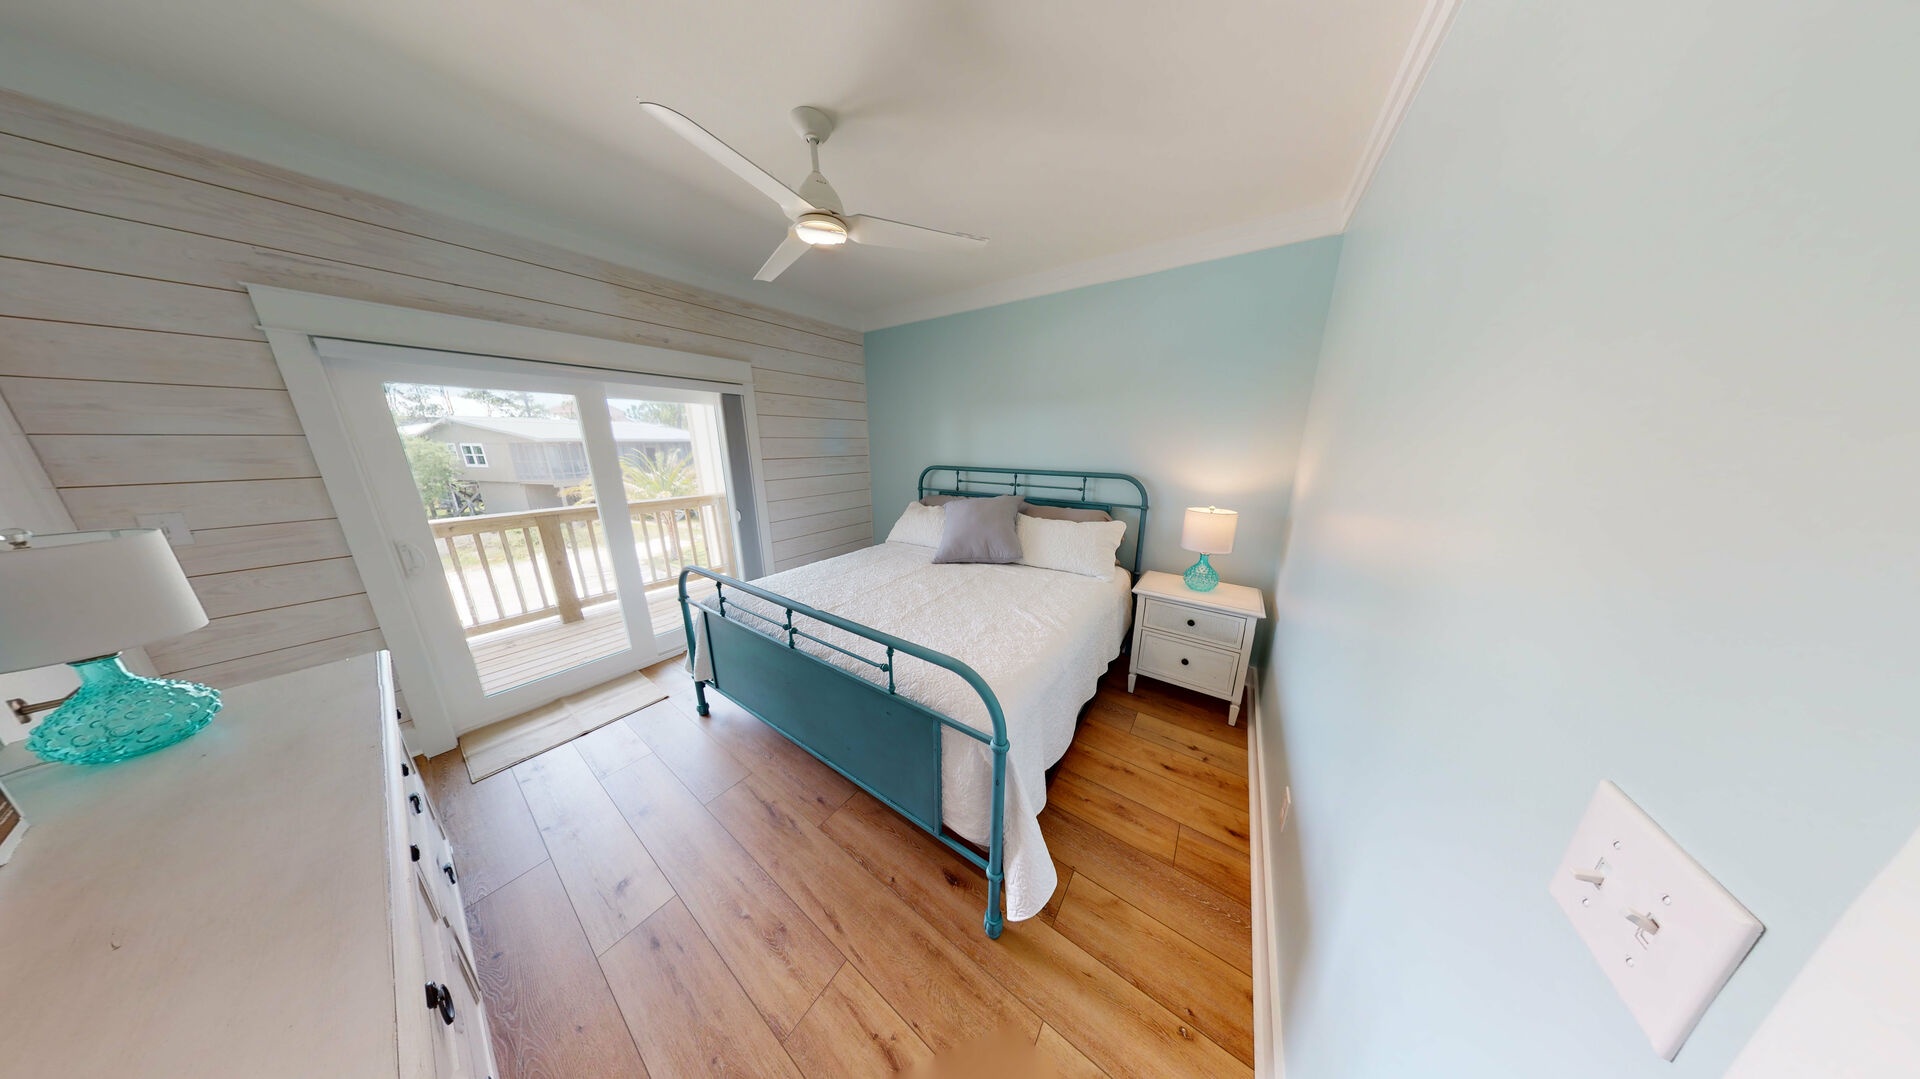 Bedroom #4 has a queen bed, water views, balcony access and a TV, located on the 2nd floor